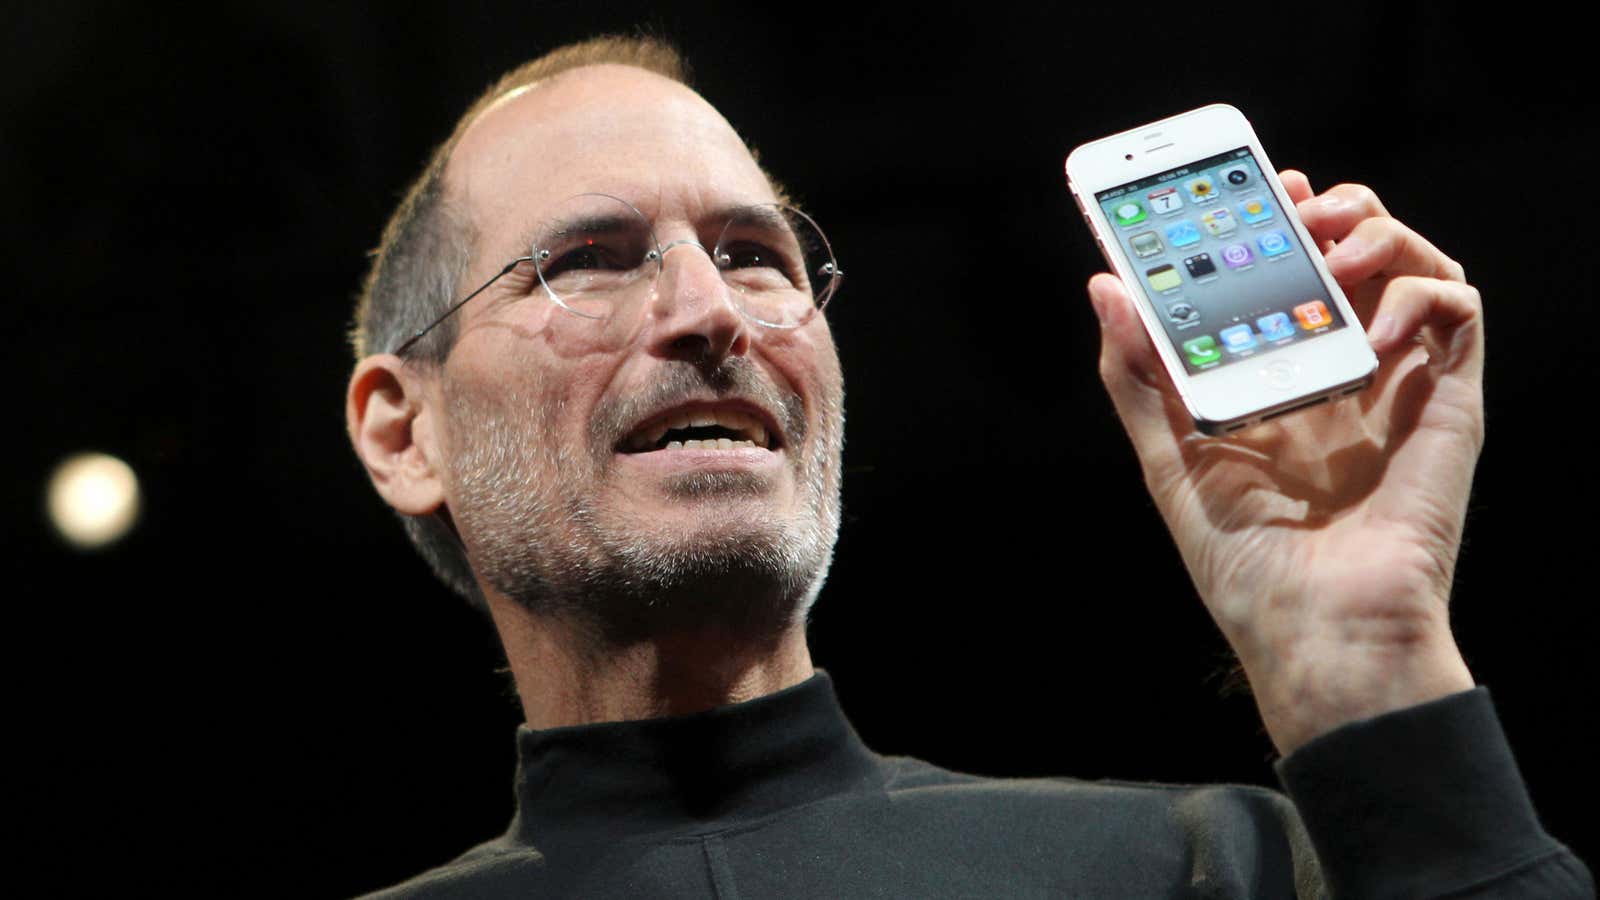 Most studies of leadership focus solely on the actions of a leader like Steve Jobs.